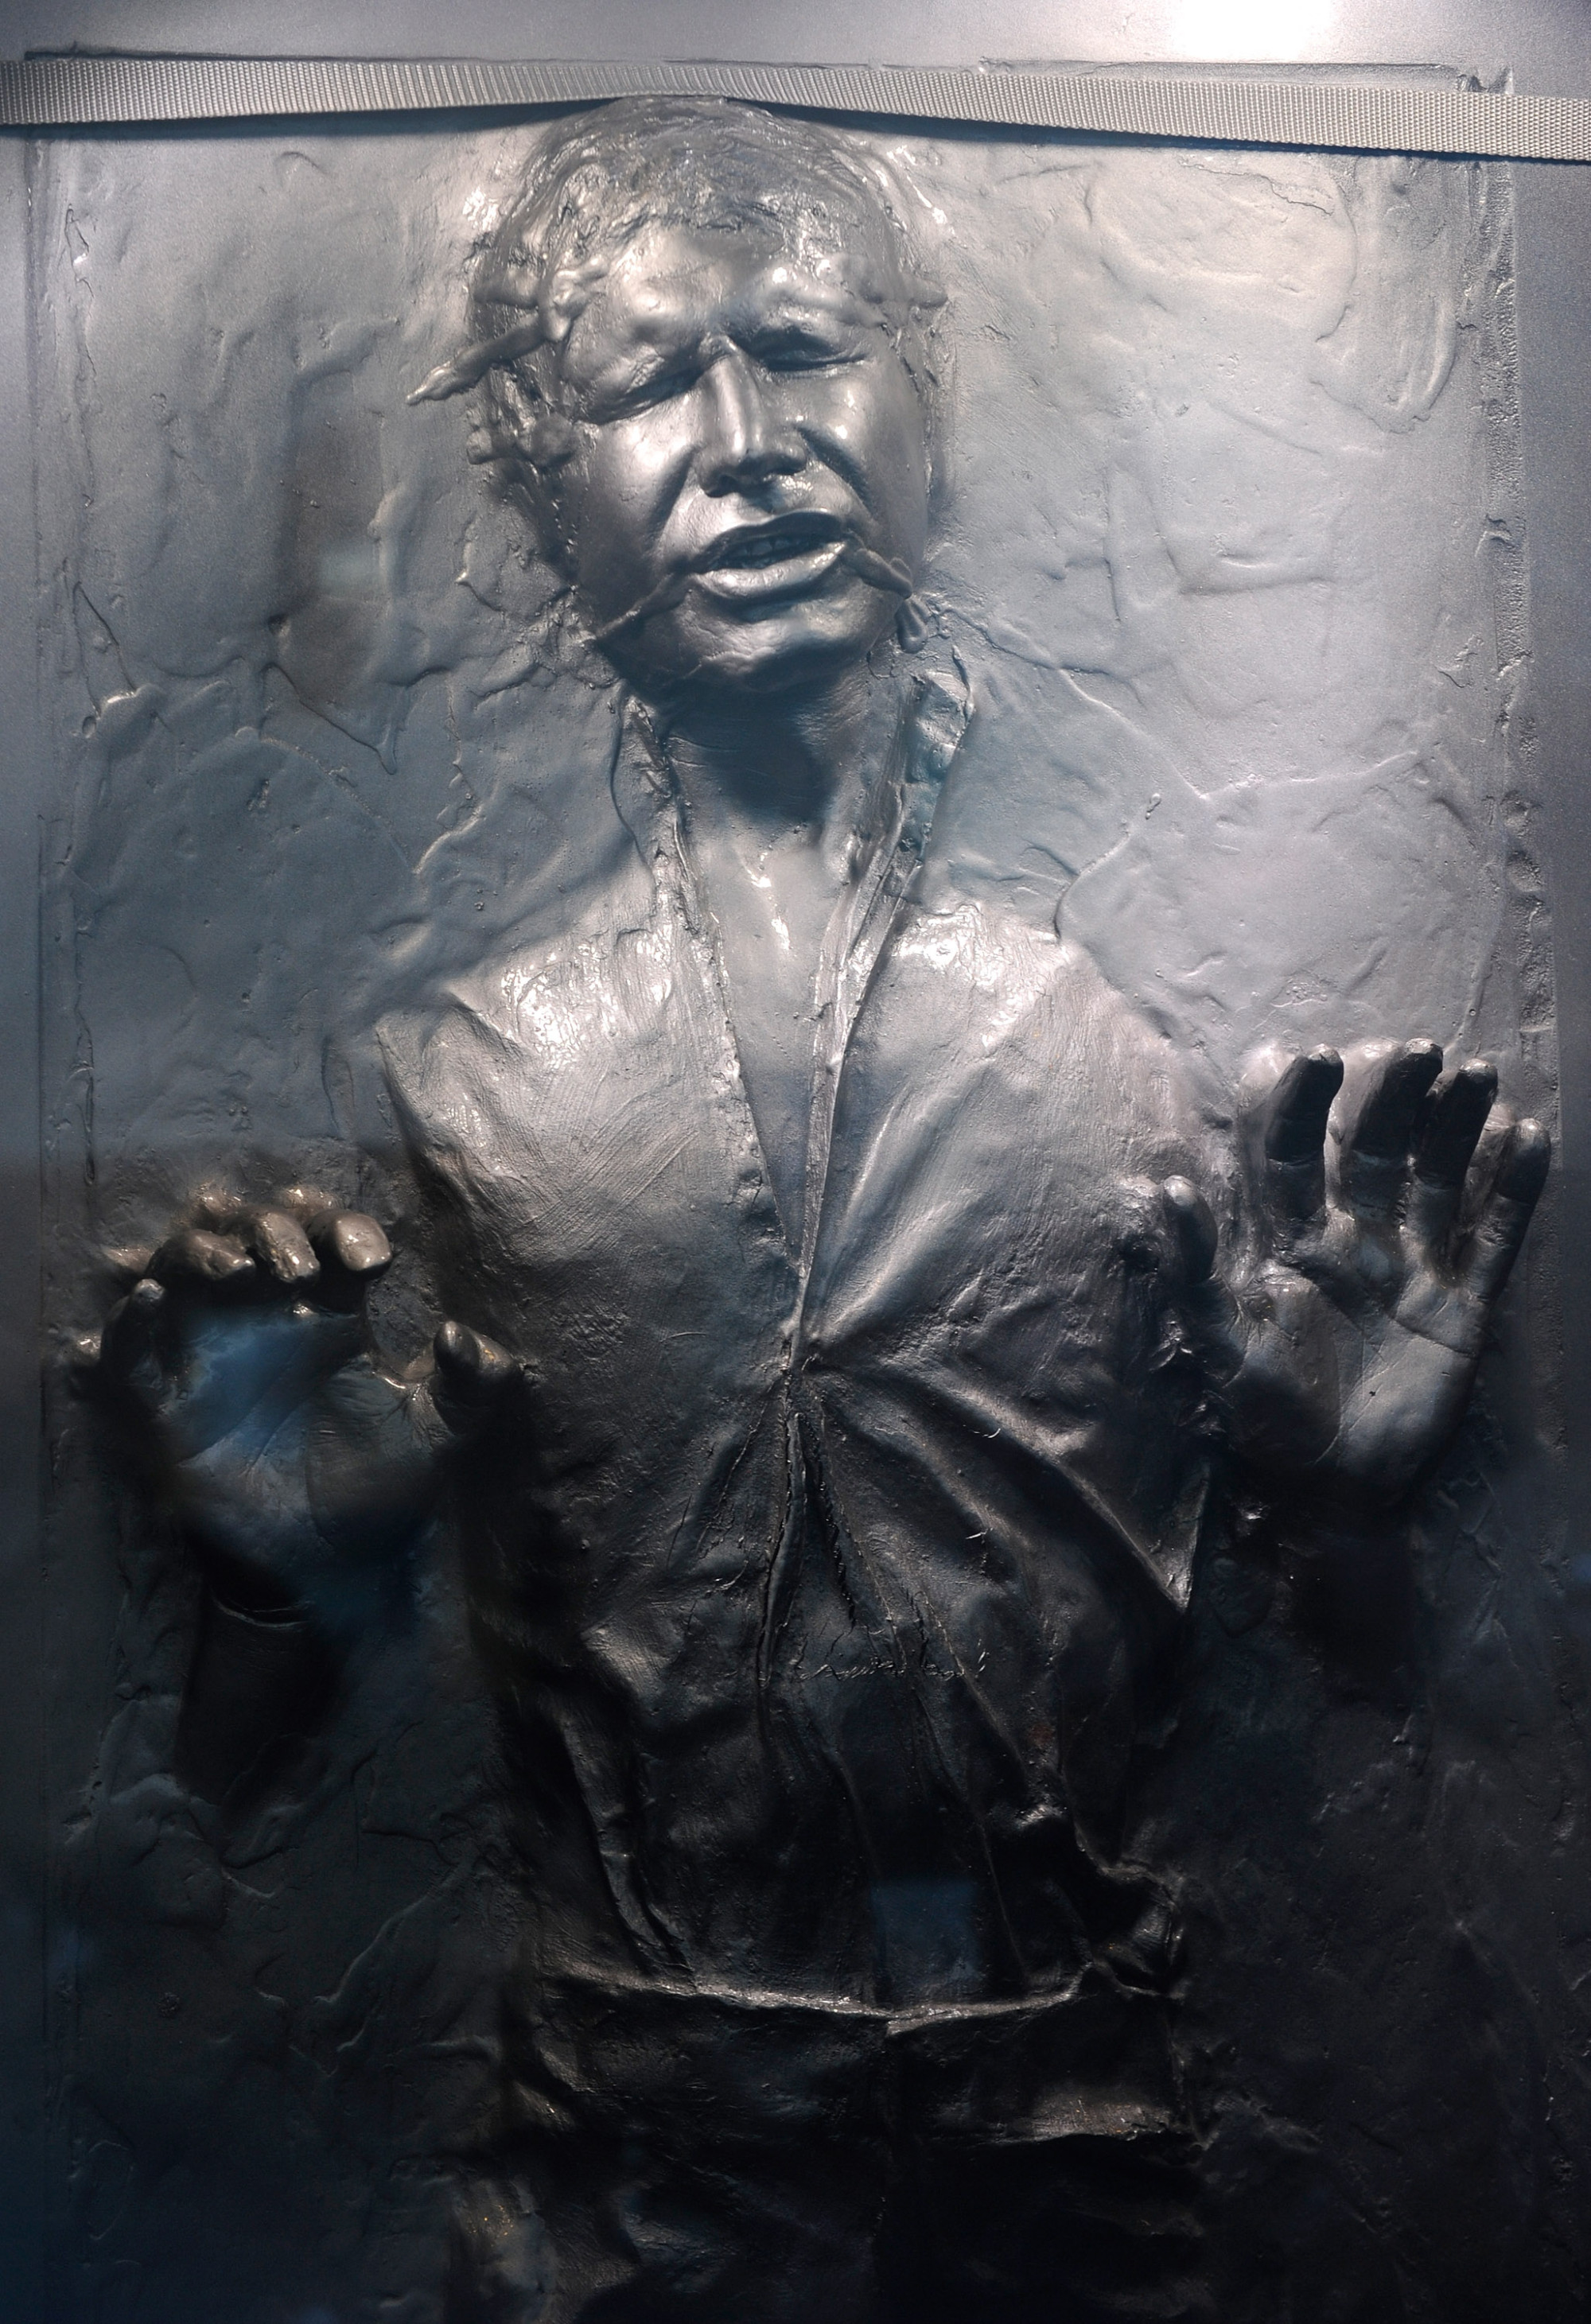 Han Solo trapped in Carbonite